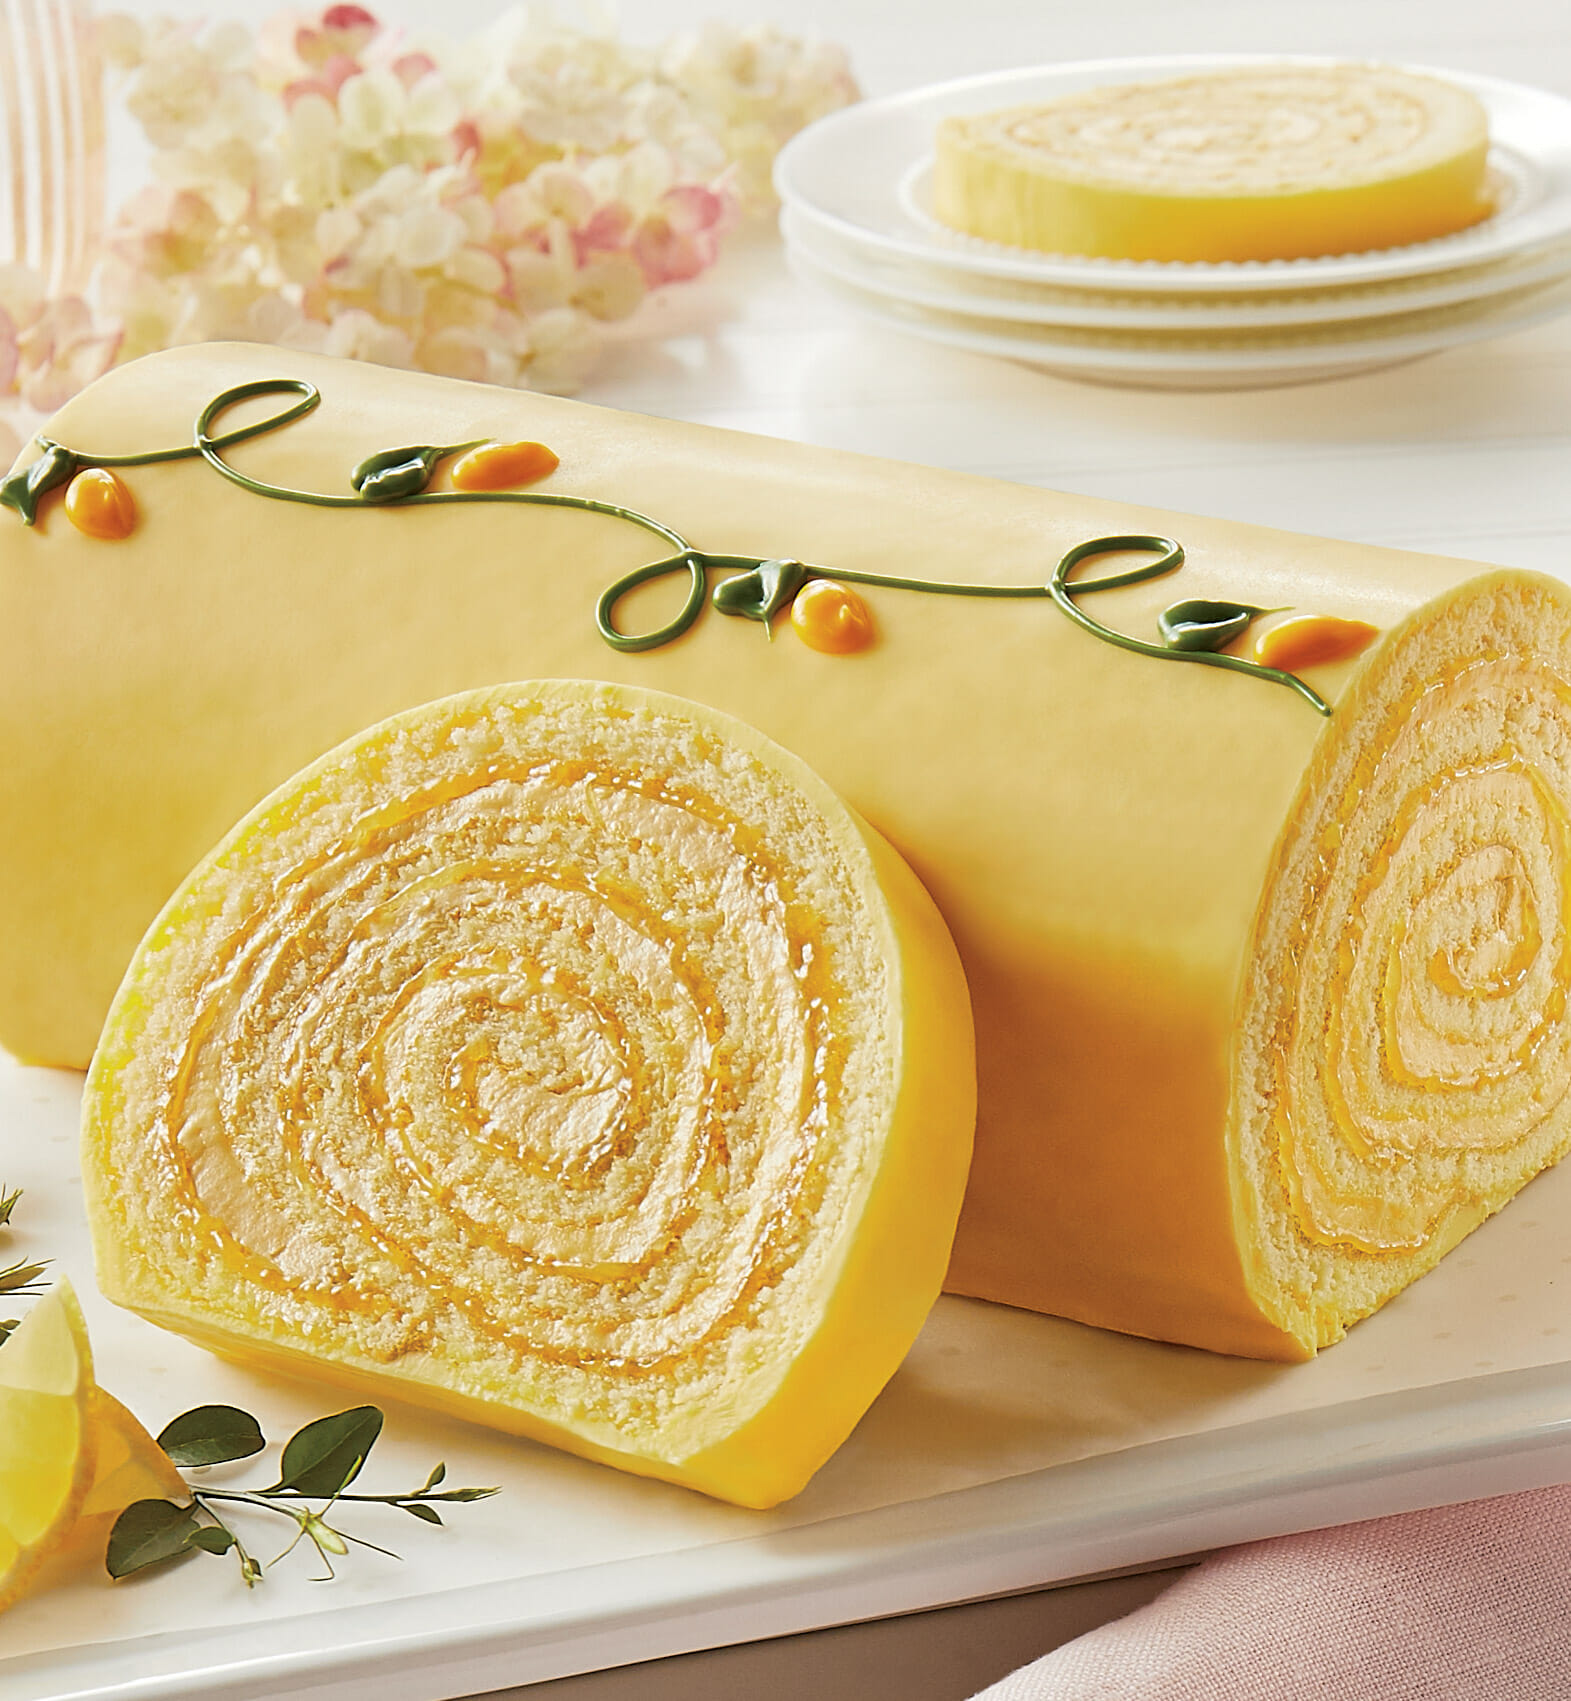 A yellow Swiss Roll-type cake coated in confection and hand decorated with icing